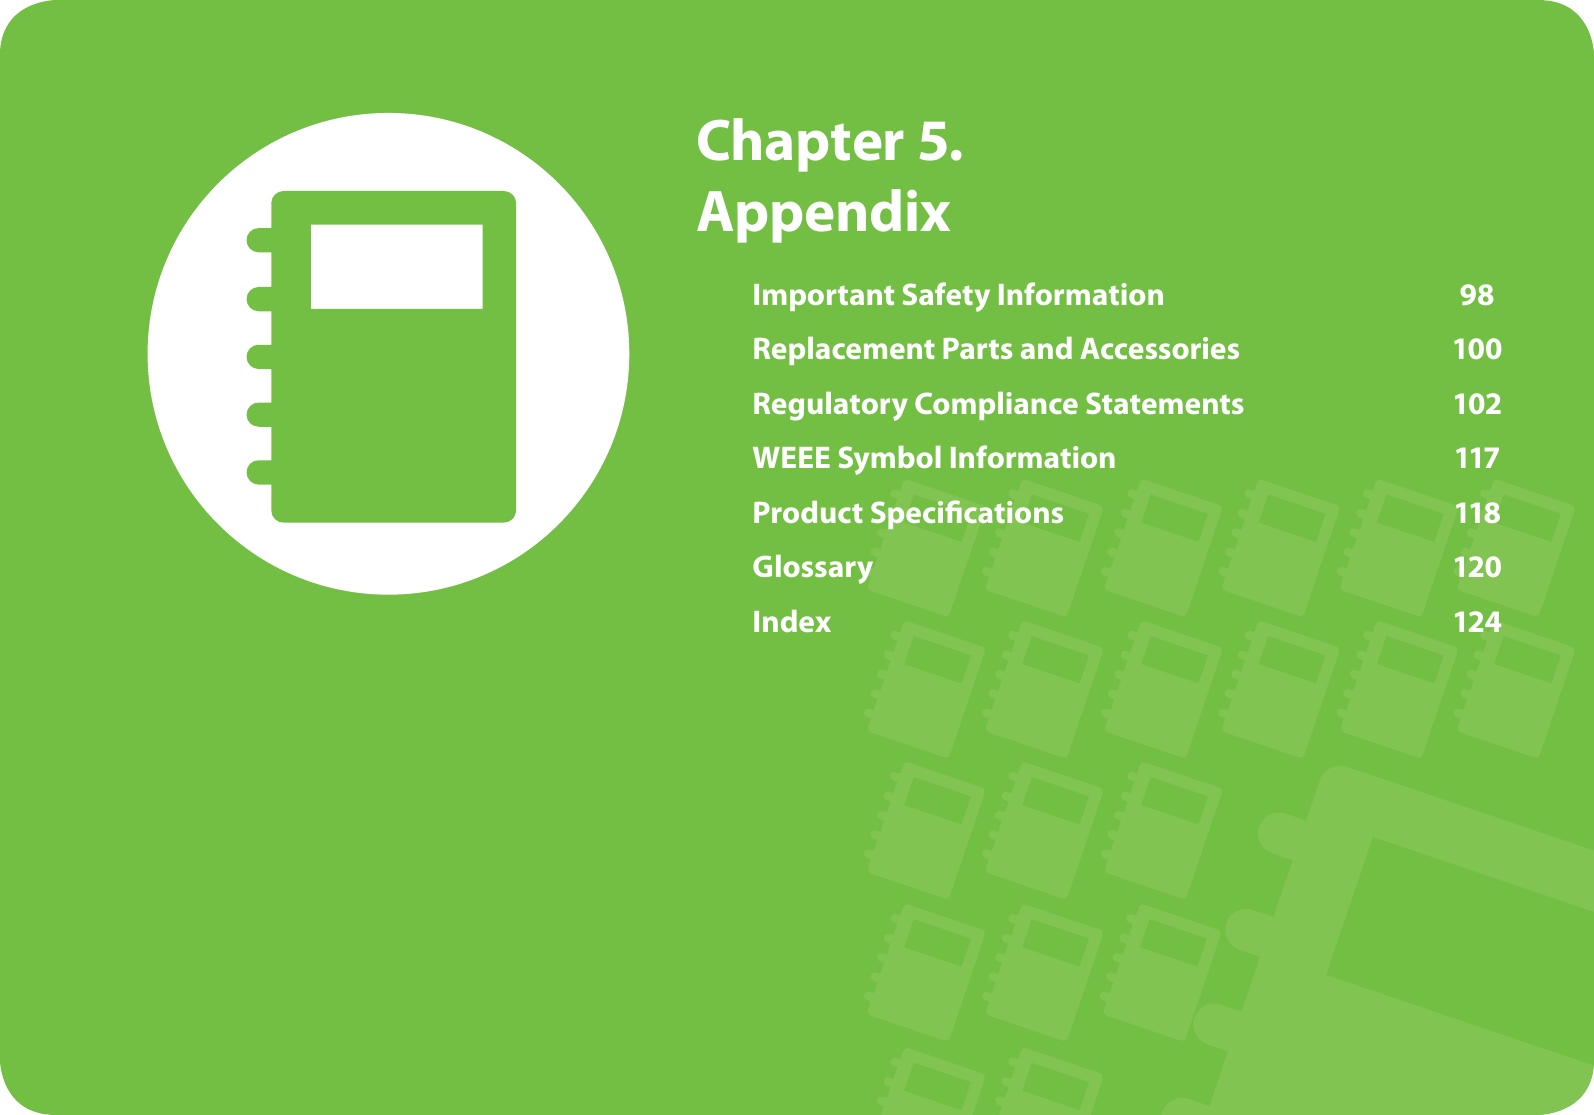  Chapter  5.  AppendixImportant Safety Information  98Replacement Parts and Accessories  100Regulatory Compliance Statements  102WEEE Symbol Information  117Product Speci cations  118Glossary 120Index 124